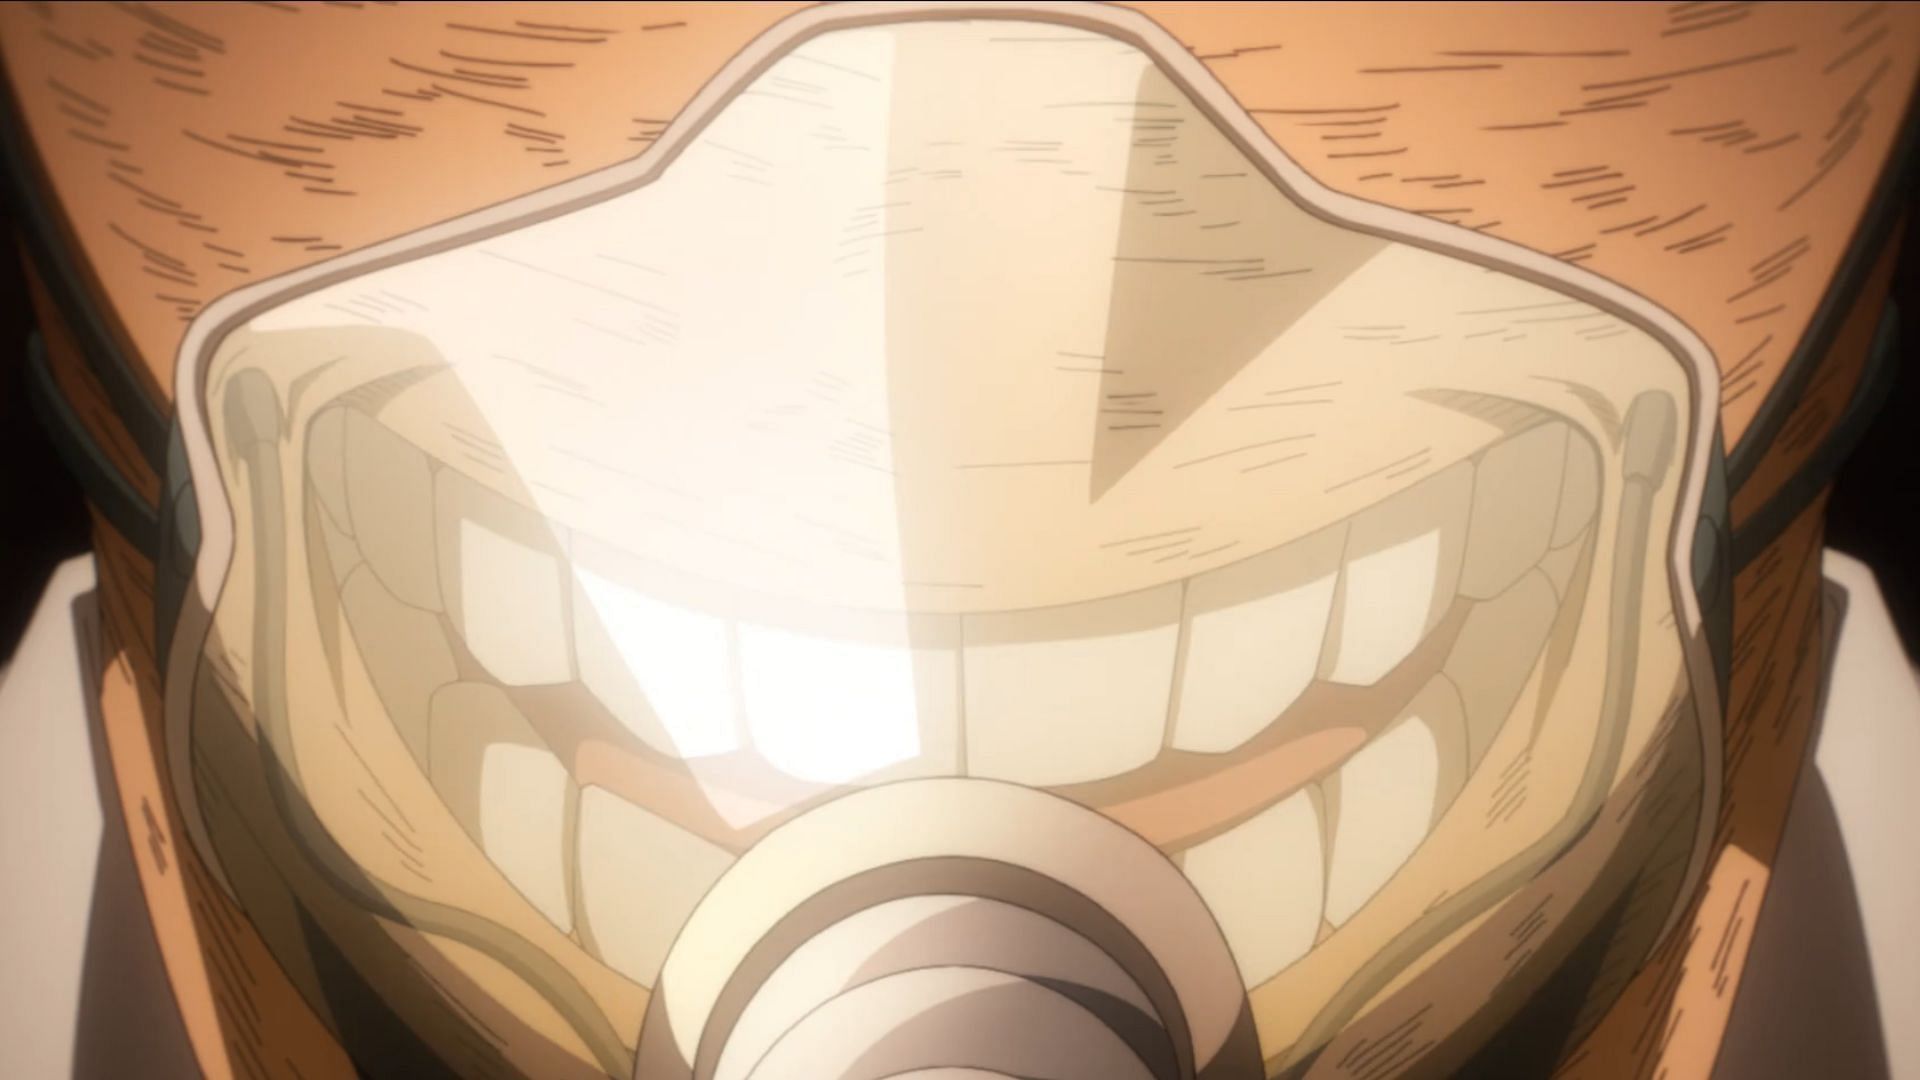 All For One as seen in My Hero Academia season 6 episode 21 preview (Image via BONES)